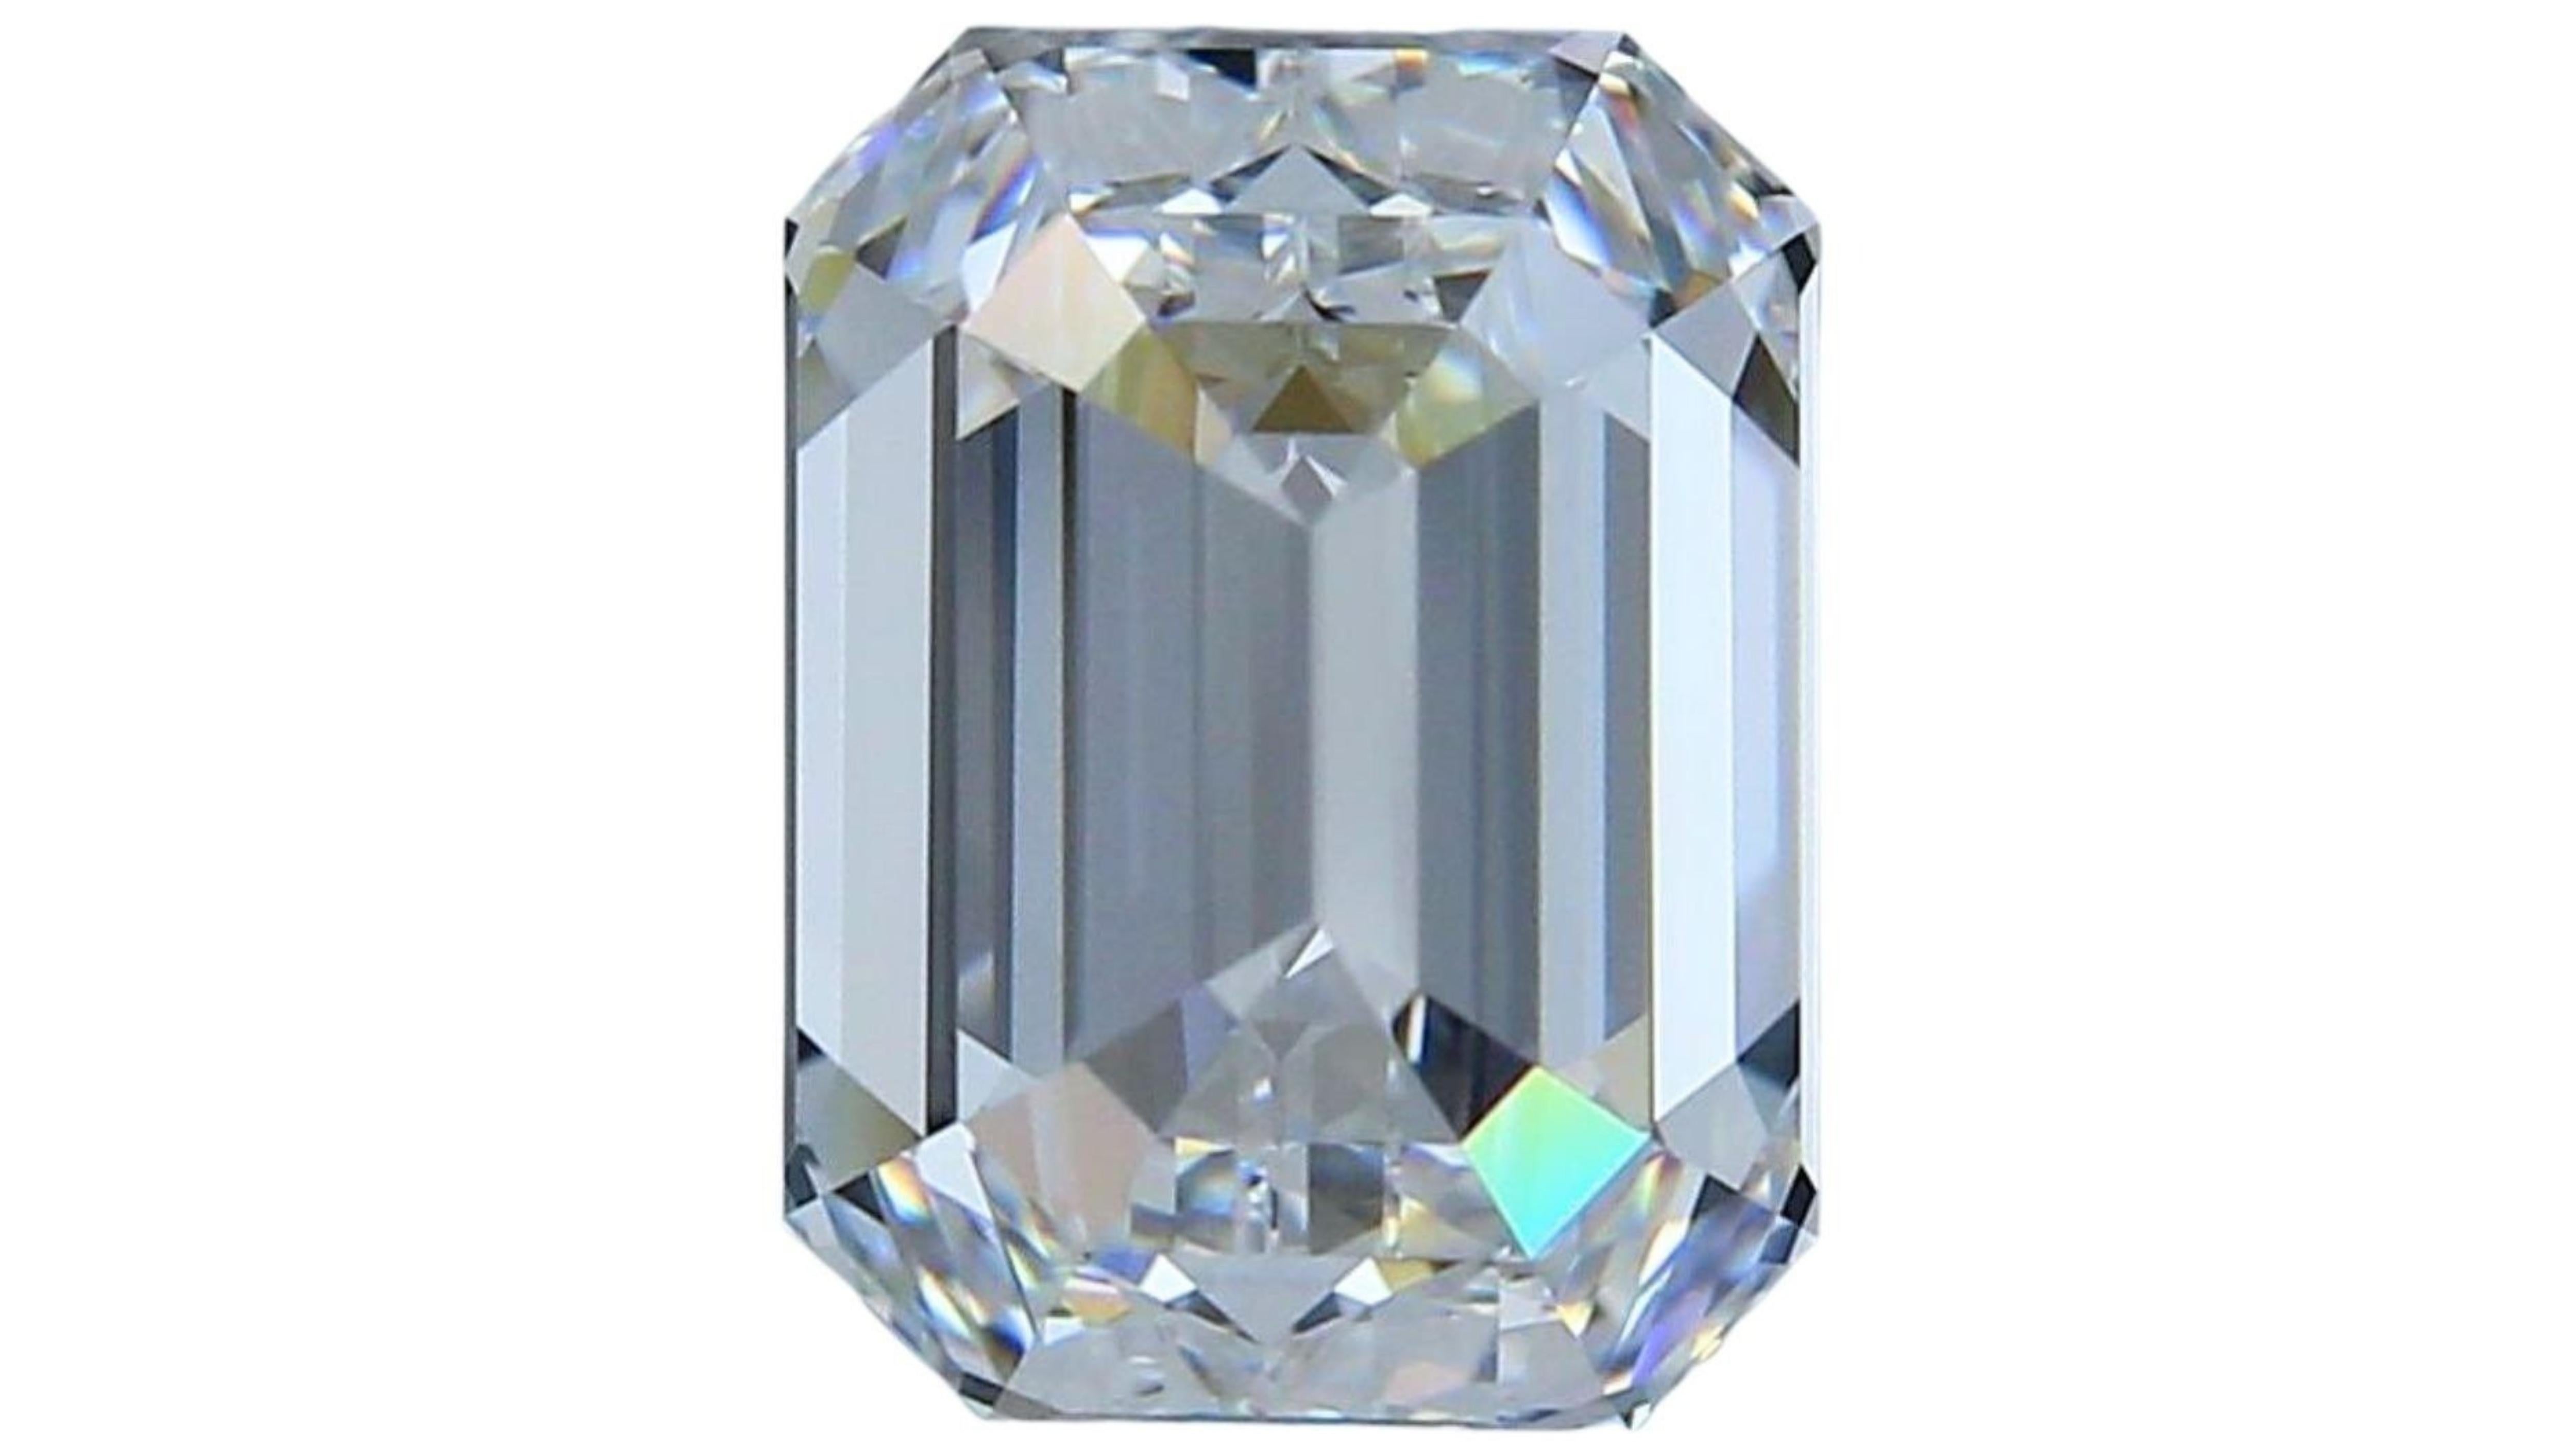 1 pc. Shimmering 4.01 Carat Emerald Cut Natural Diamond For Sale 3